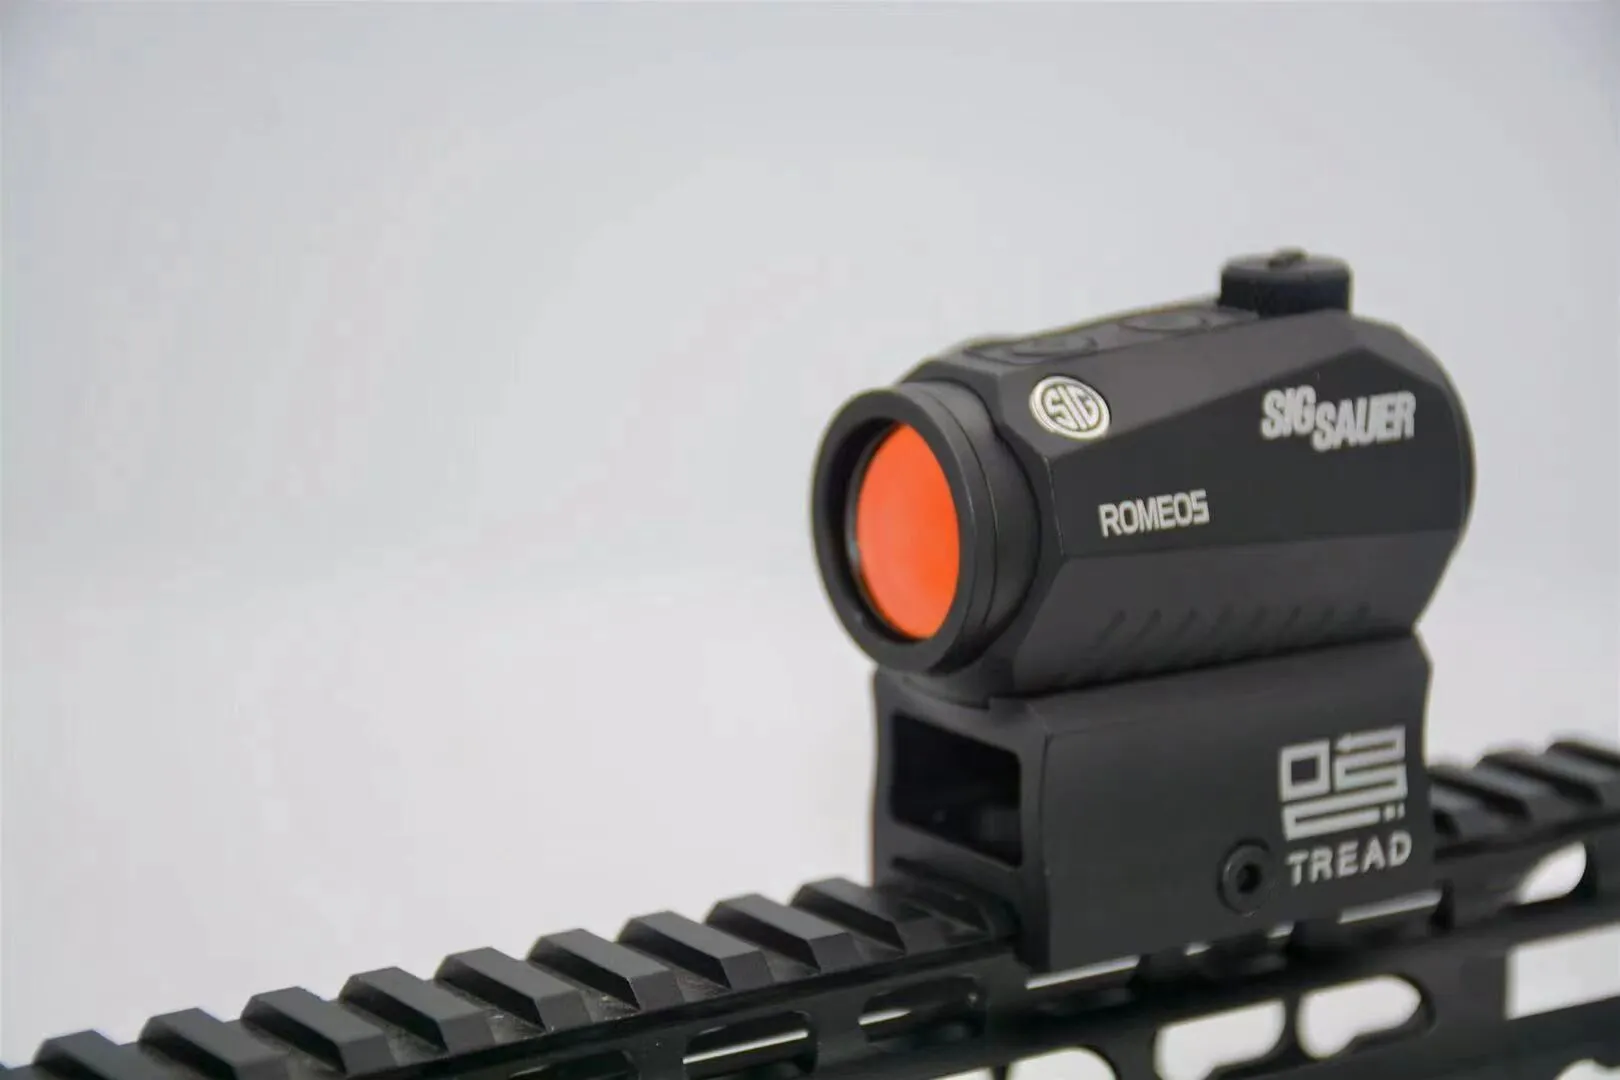 SIG ROMEO5 Red Dot Reflex Sight 1x20mm SOR52010 2 MOA Red Dot Hunting Rifle Scope And Airsoft With High and Low Mount